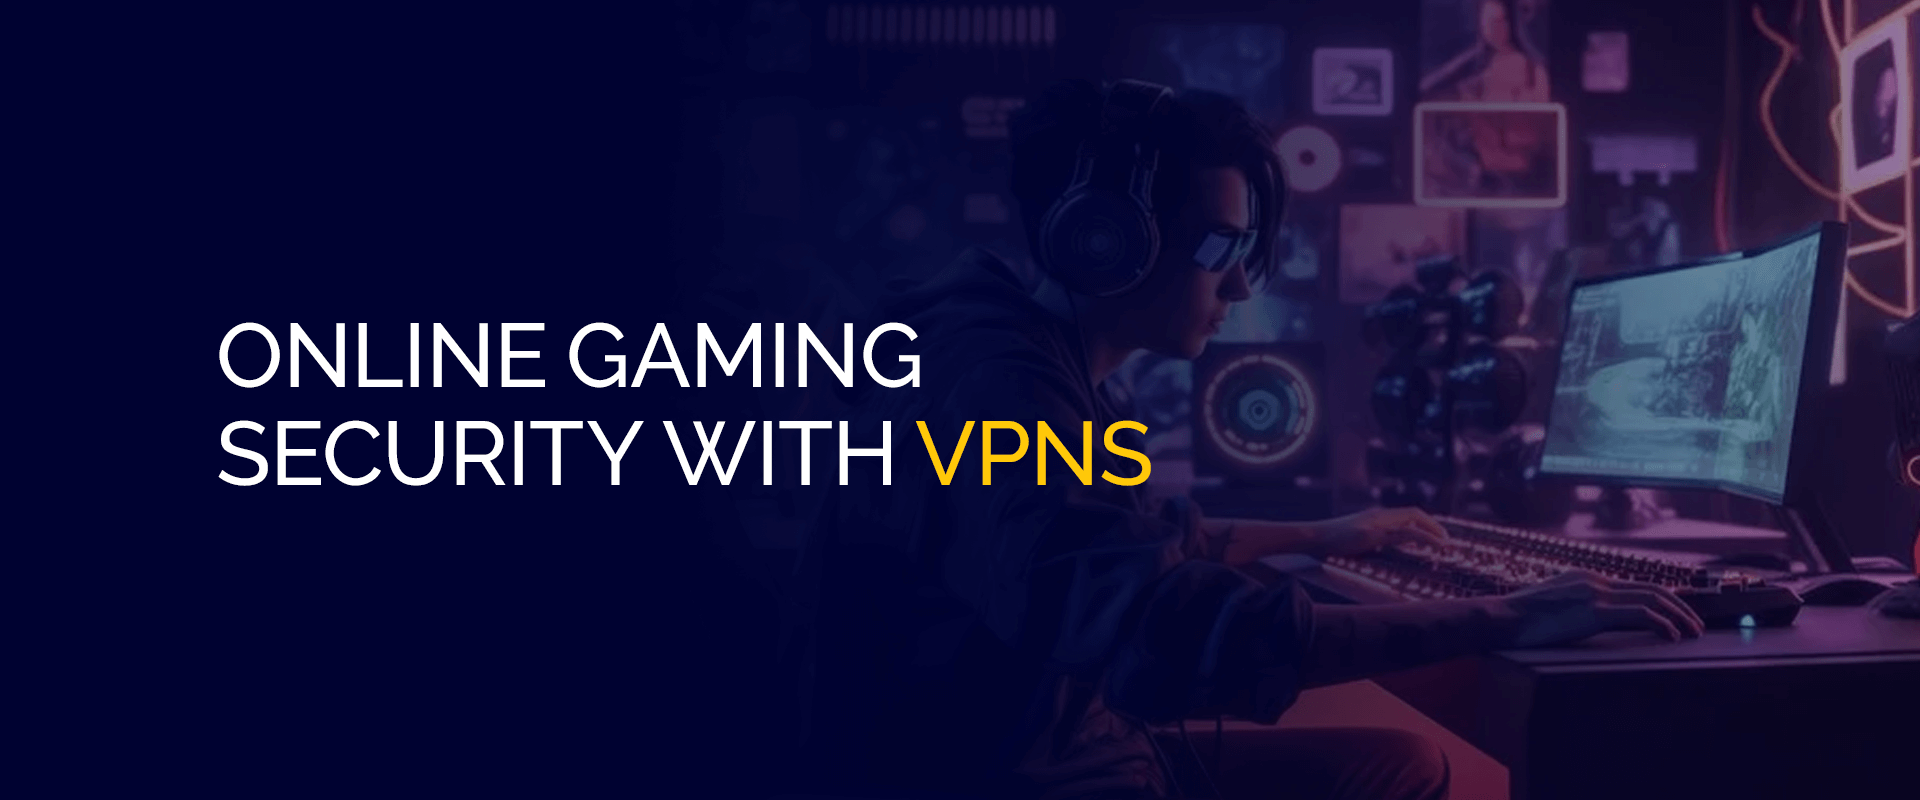 Online Gaming Security With VPNs